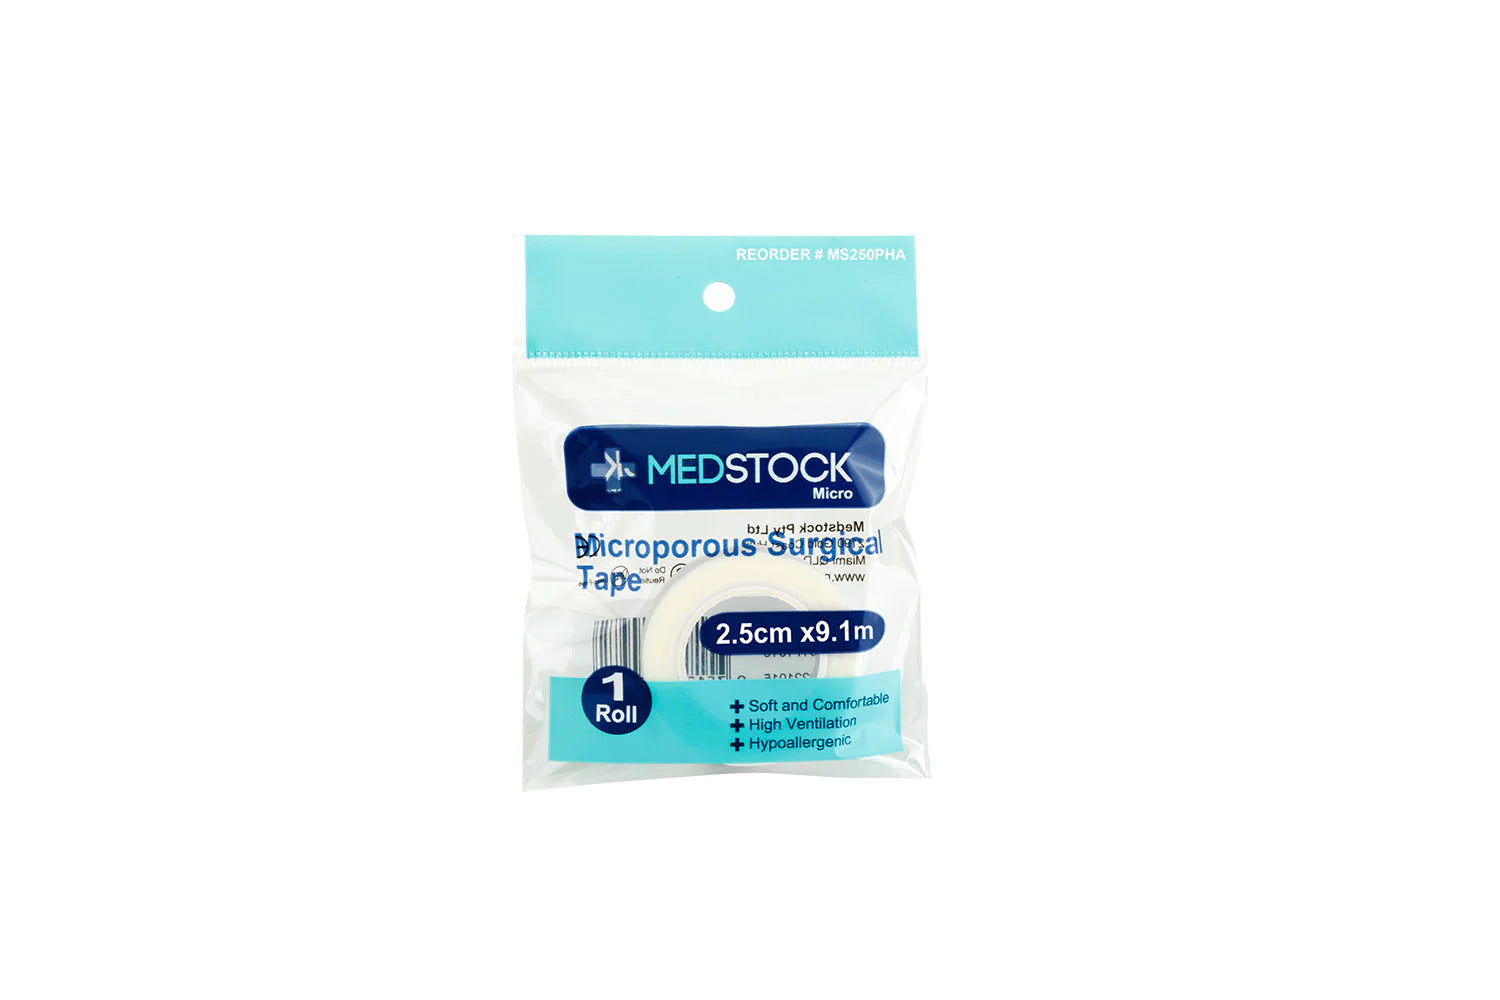 Medstock Microporous Surgical Tape (Wrapped) -Box of 24